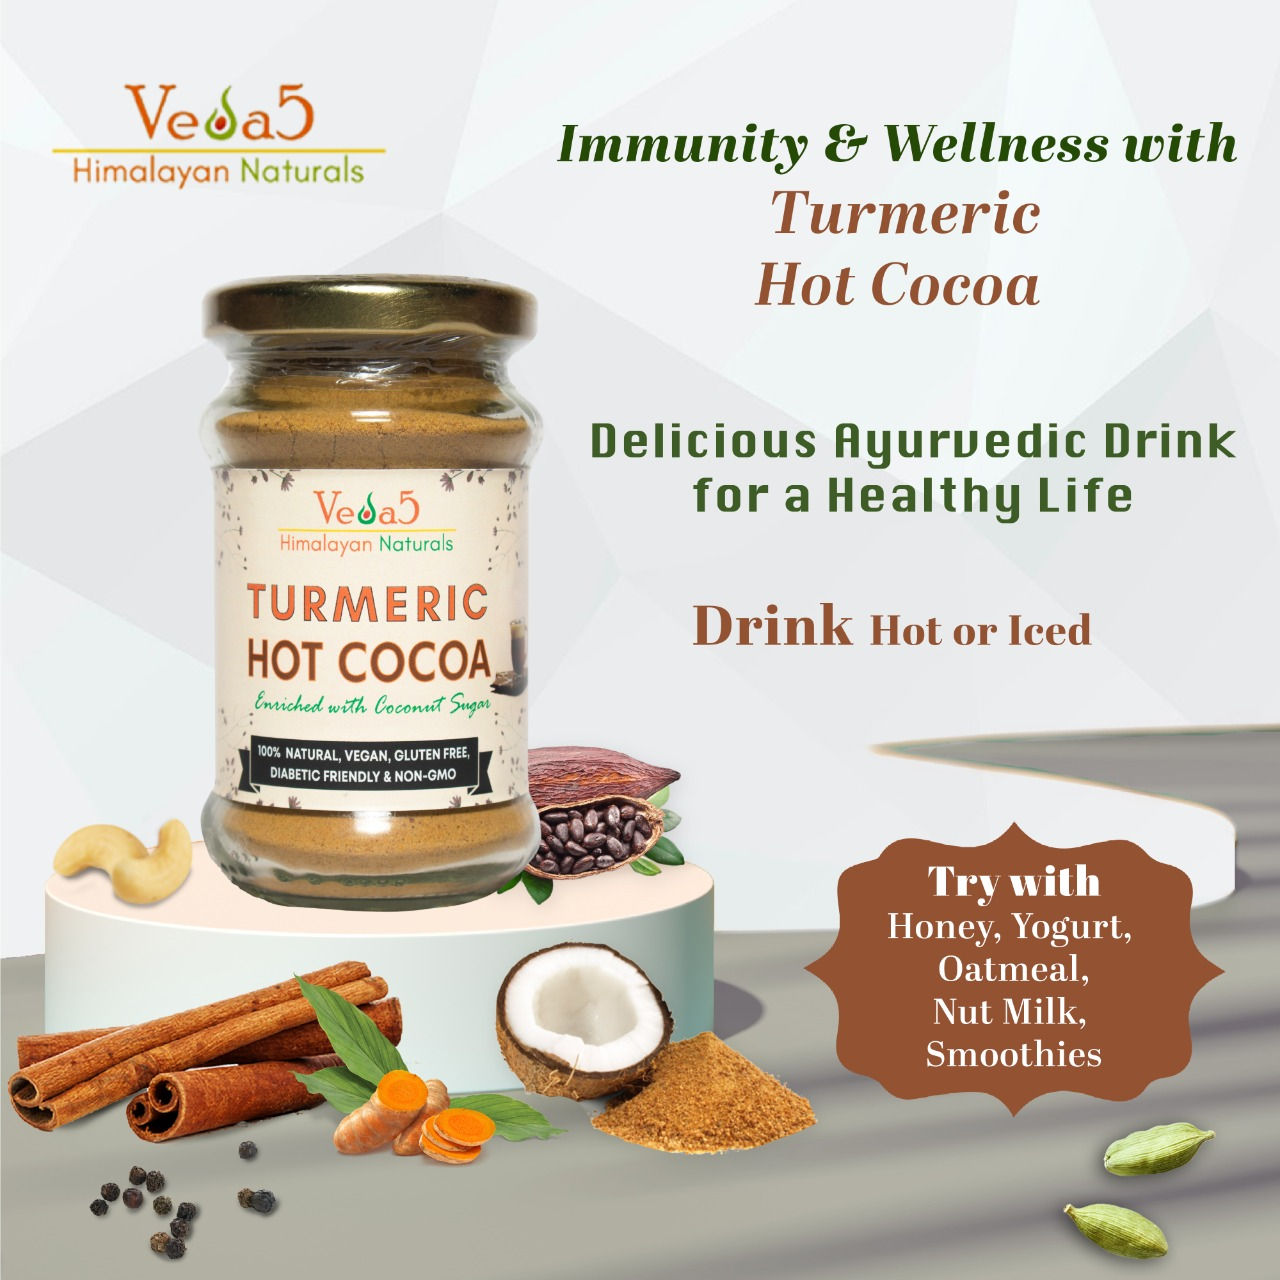 Turmeric Hot Cocoa Enriched with Coconut Sugar Veda5 Himalayan Naturals